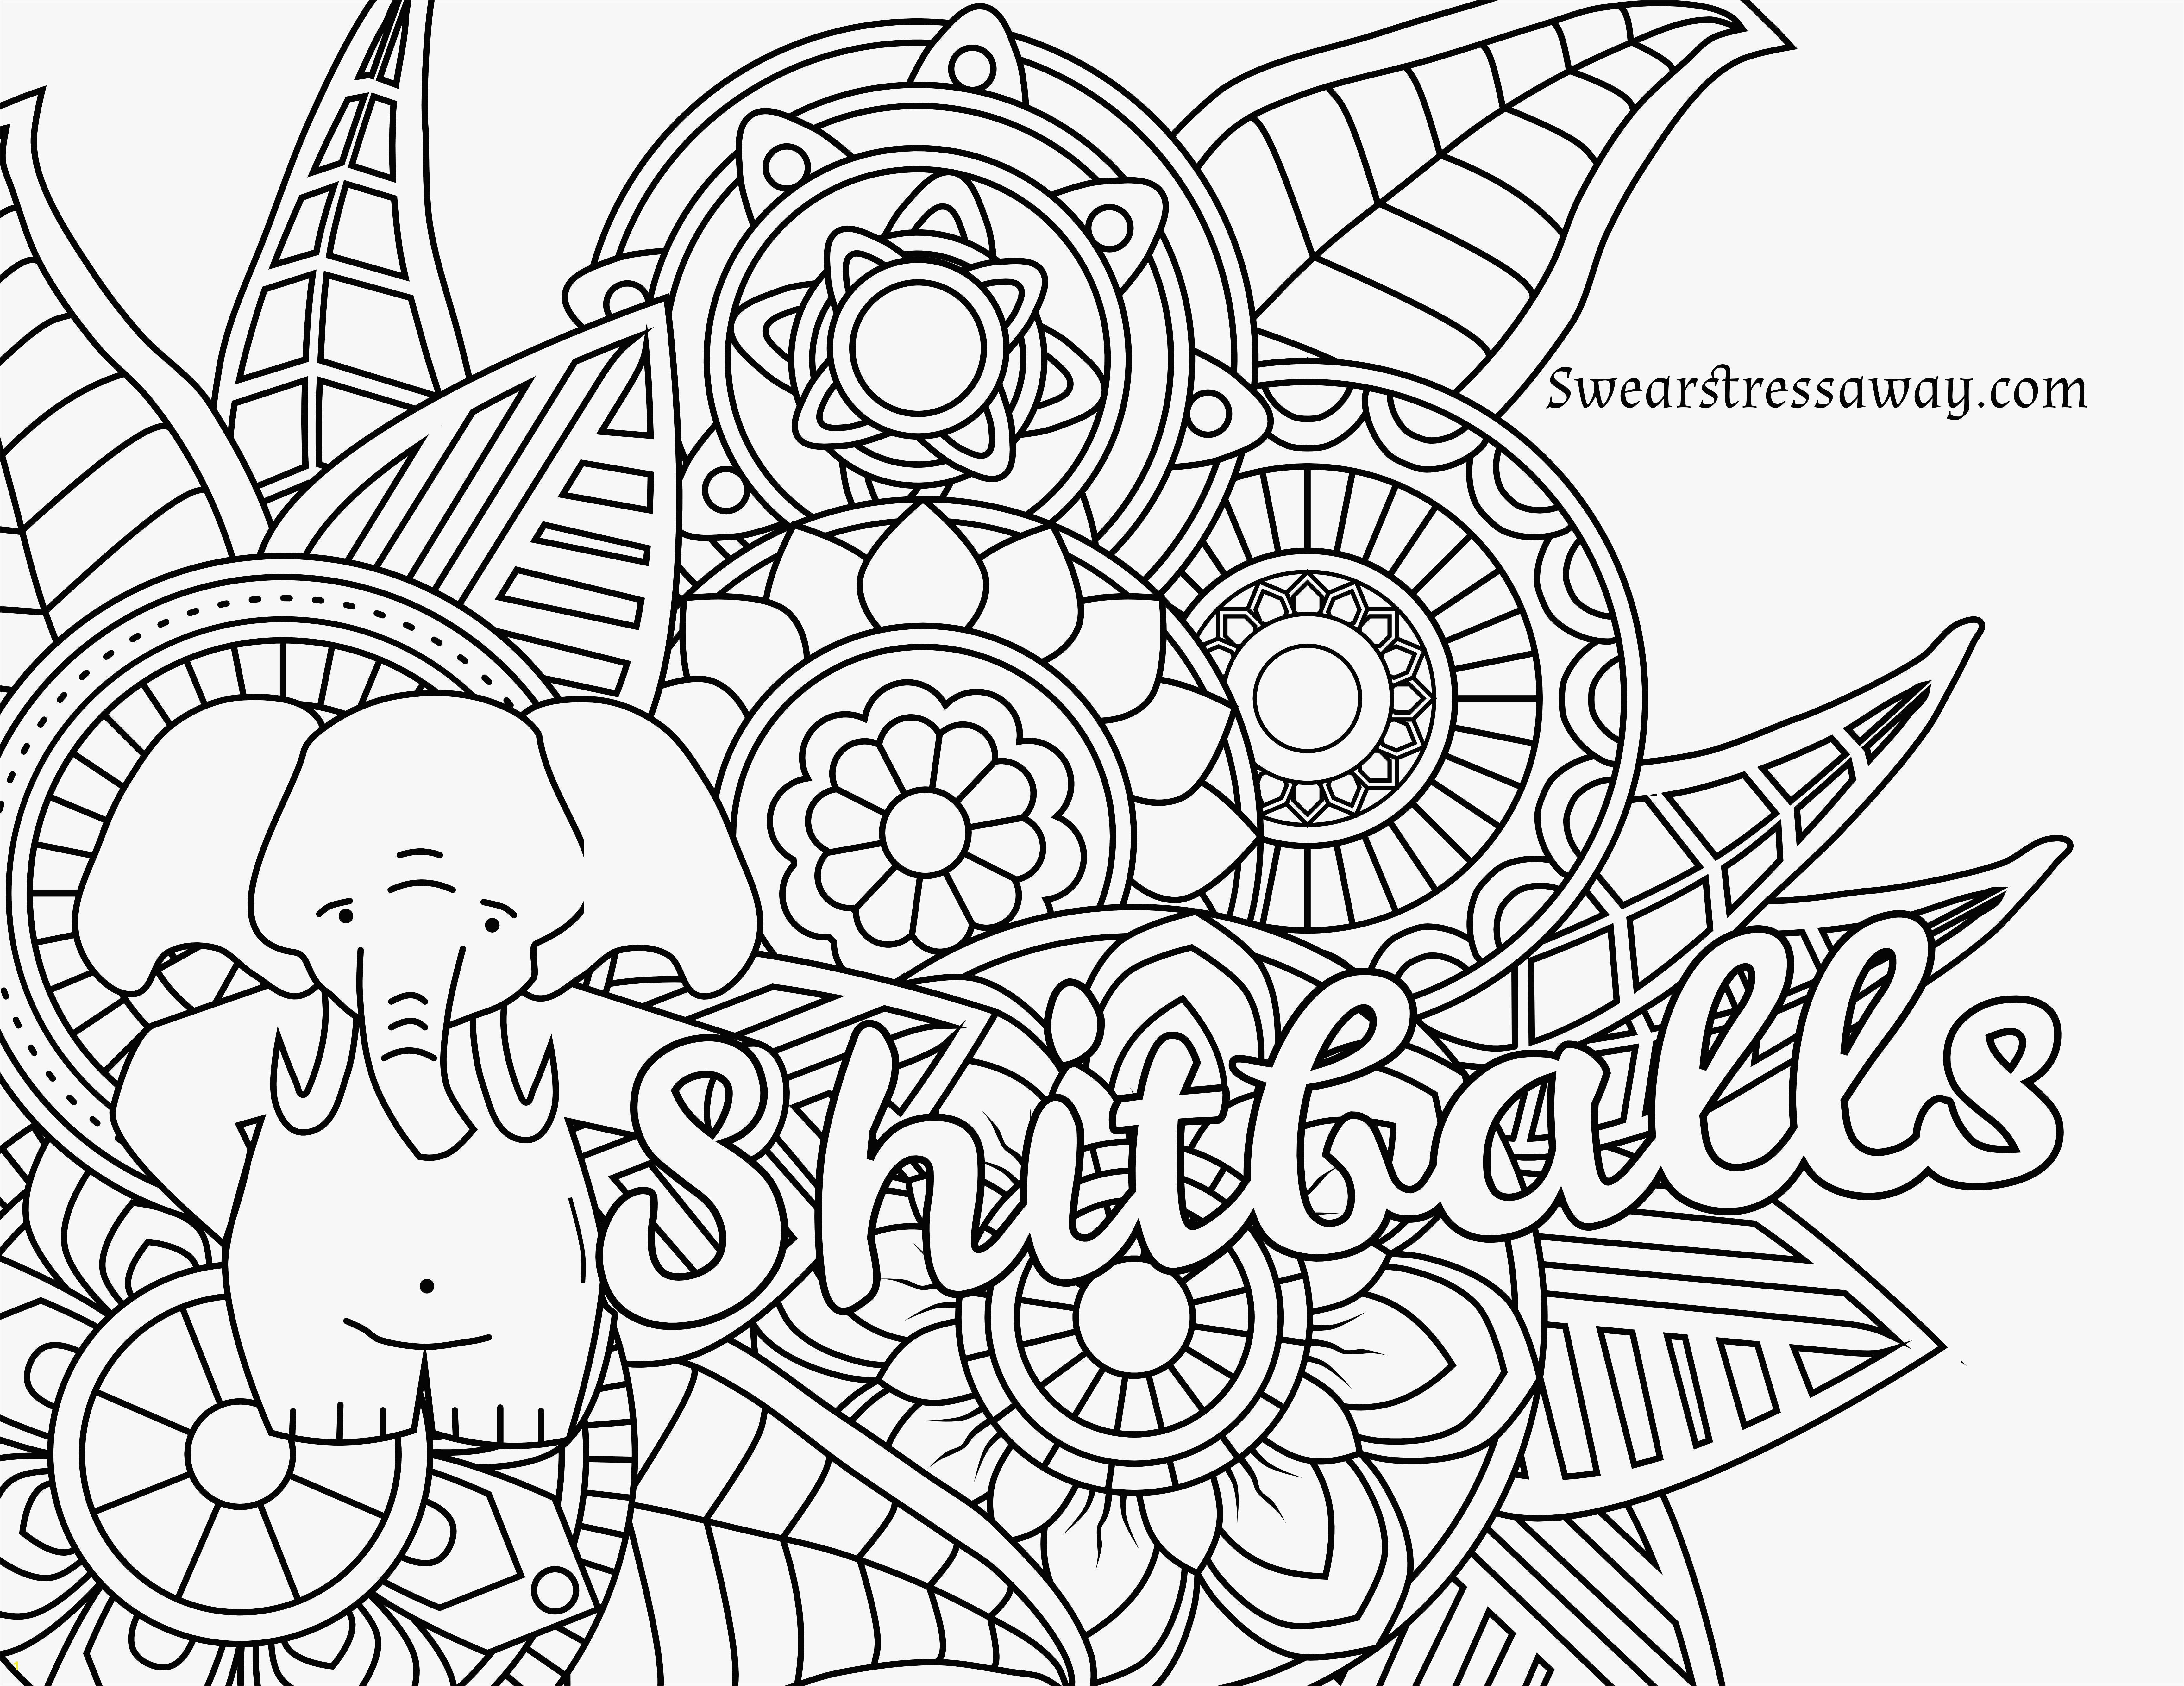 Free Coloring Pages Owls Lovely Engaging Fall Coloring Pages Printable 26 Kids New 0d Page for